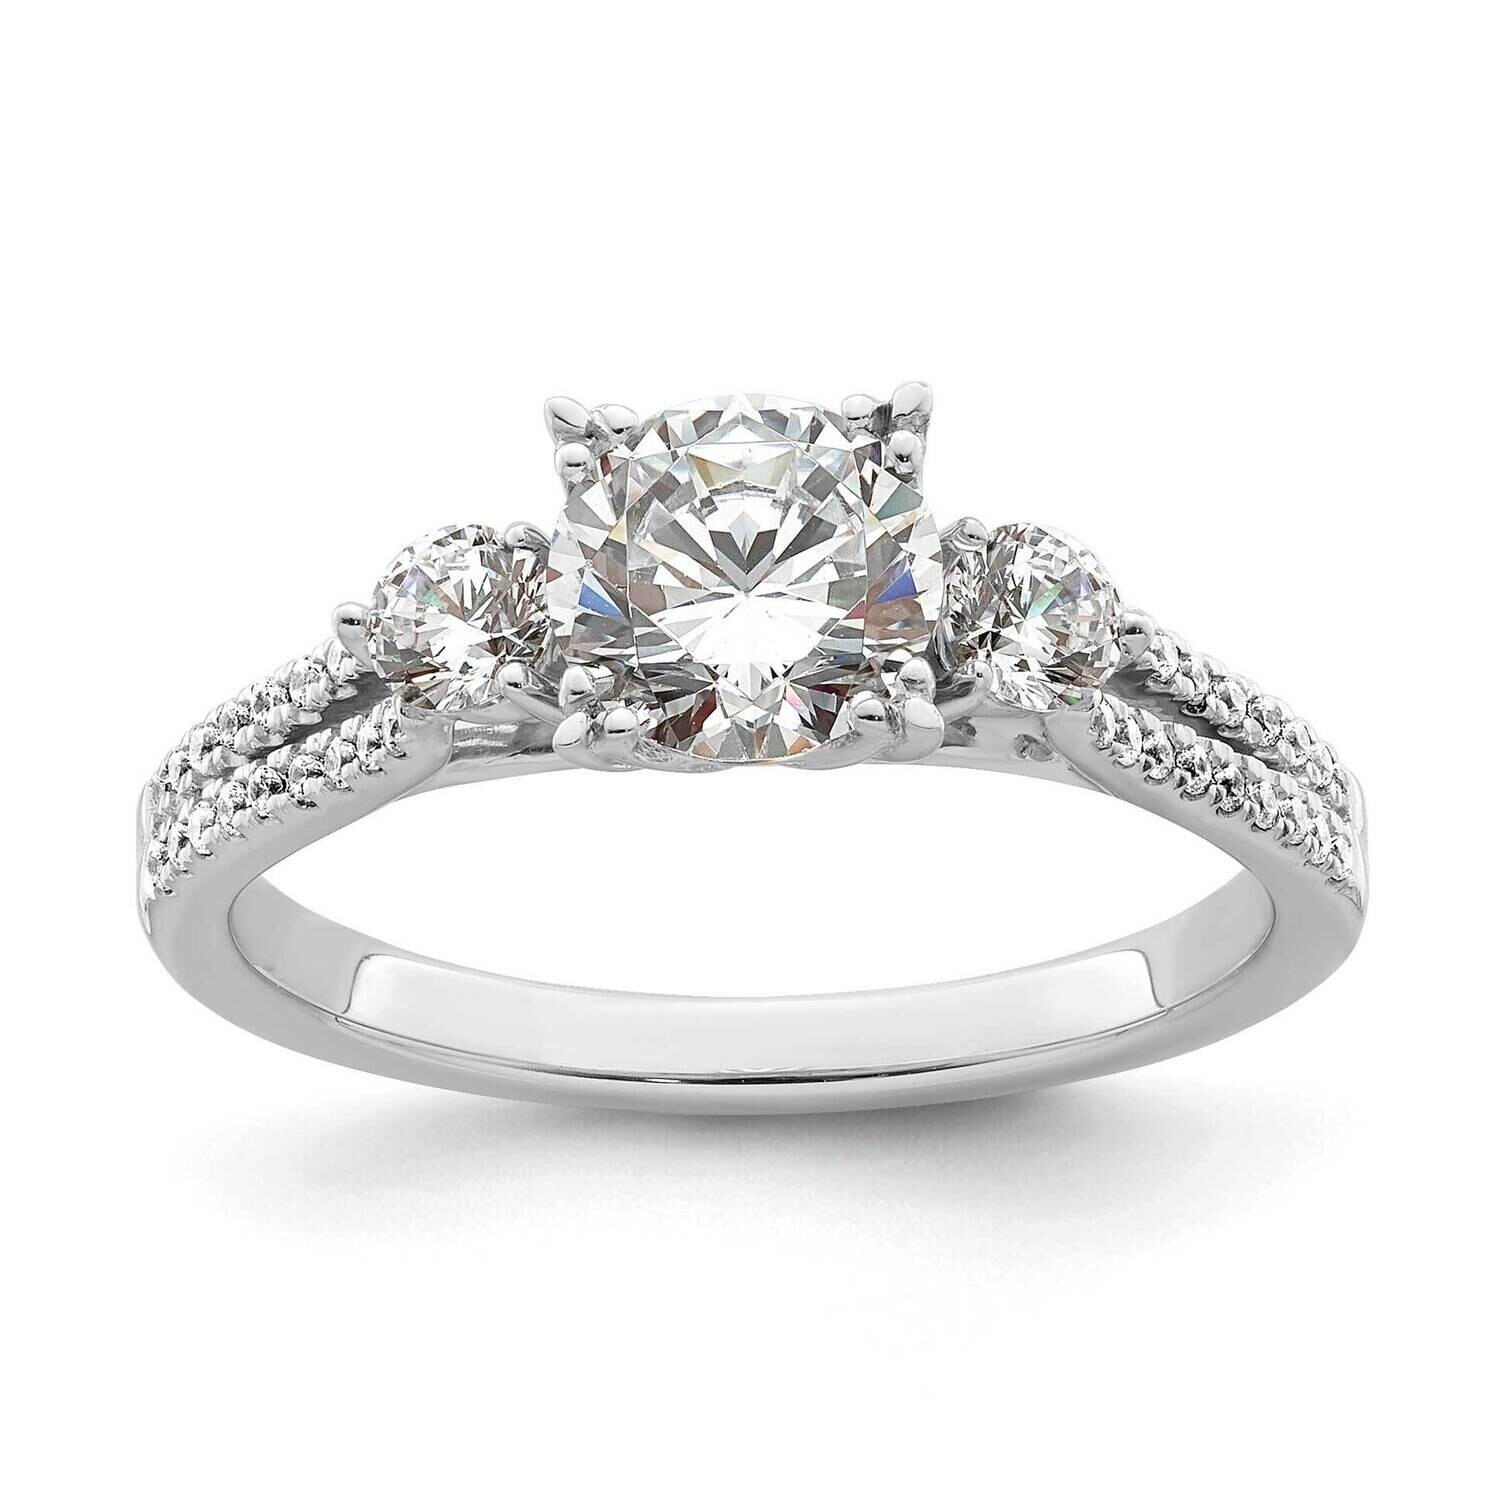 3-Stone Holds 1 Carat 6.5mm Round Center Includes 3/8 Carat Tw. Side Stones Semi-Mount Engagement Ring 14k White Gold RM7840E-100-WAA